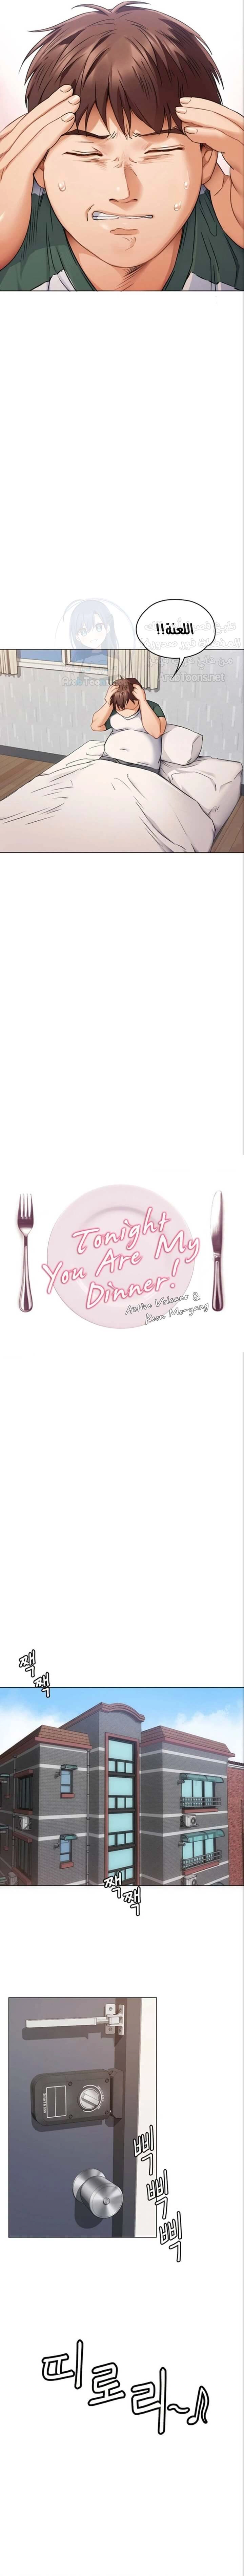 Tonight, You’re My Dinner - 1 - 6531635bc178d.webp